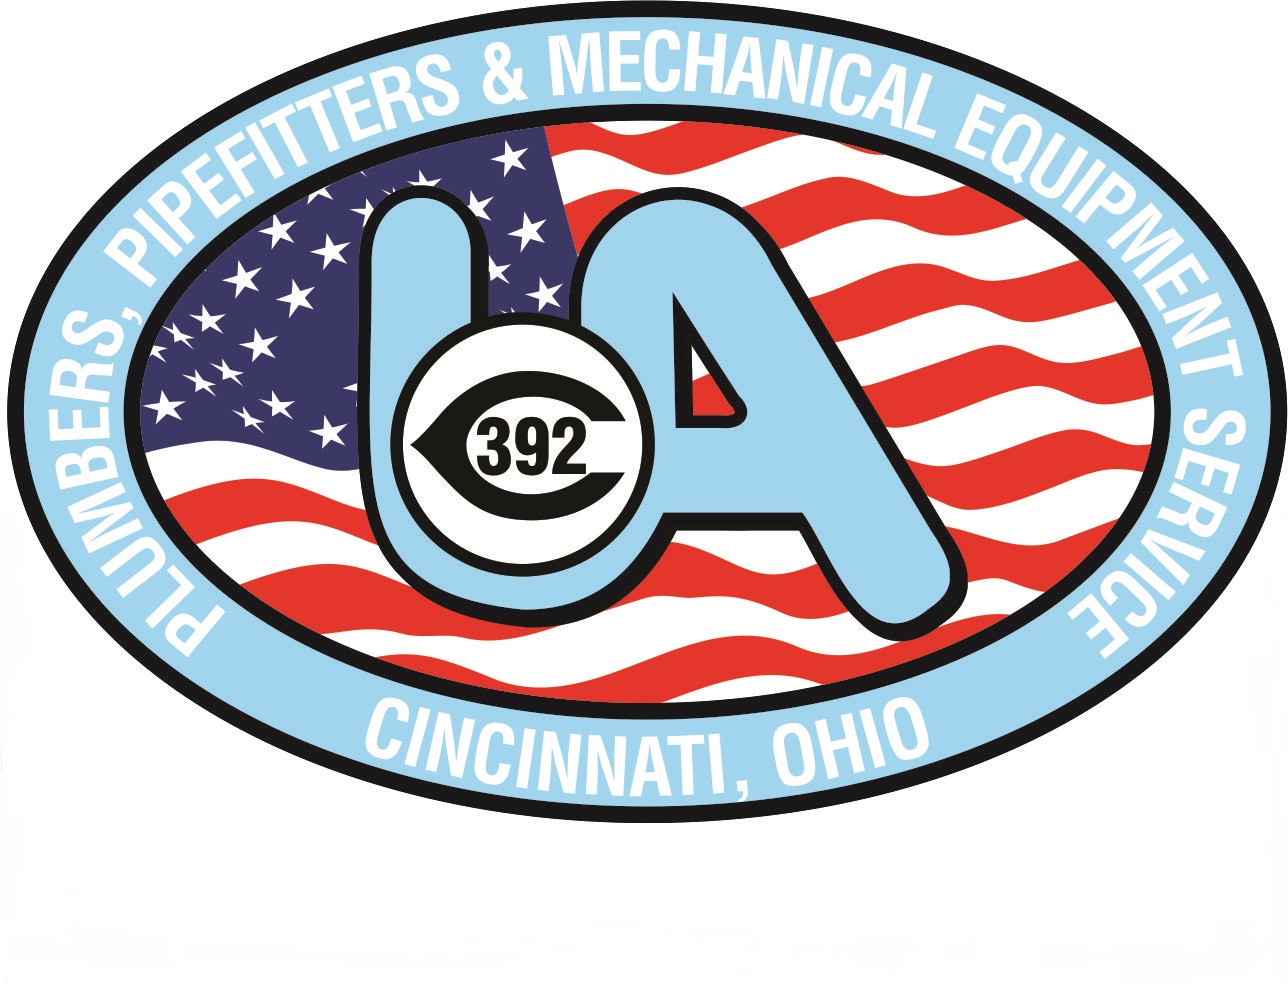 Plumbers, Pipe Fitters and Mechanical Equiptment Services Local Union 392 Logo